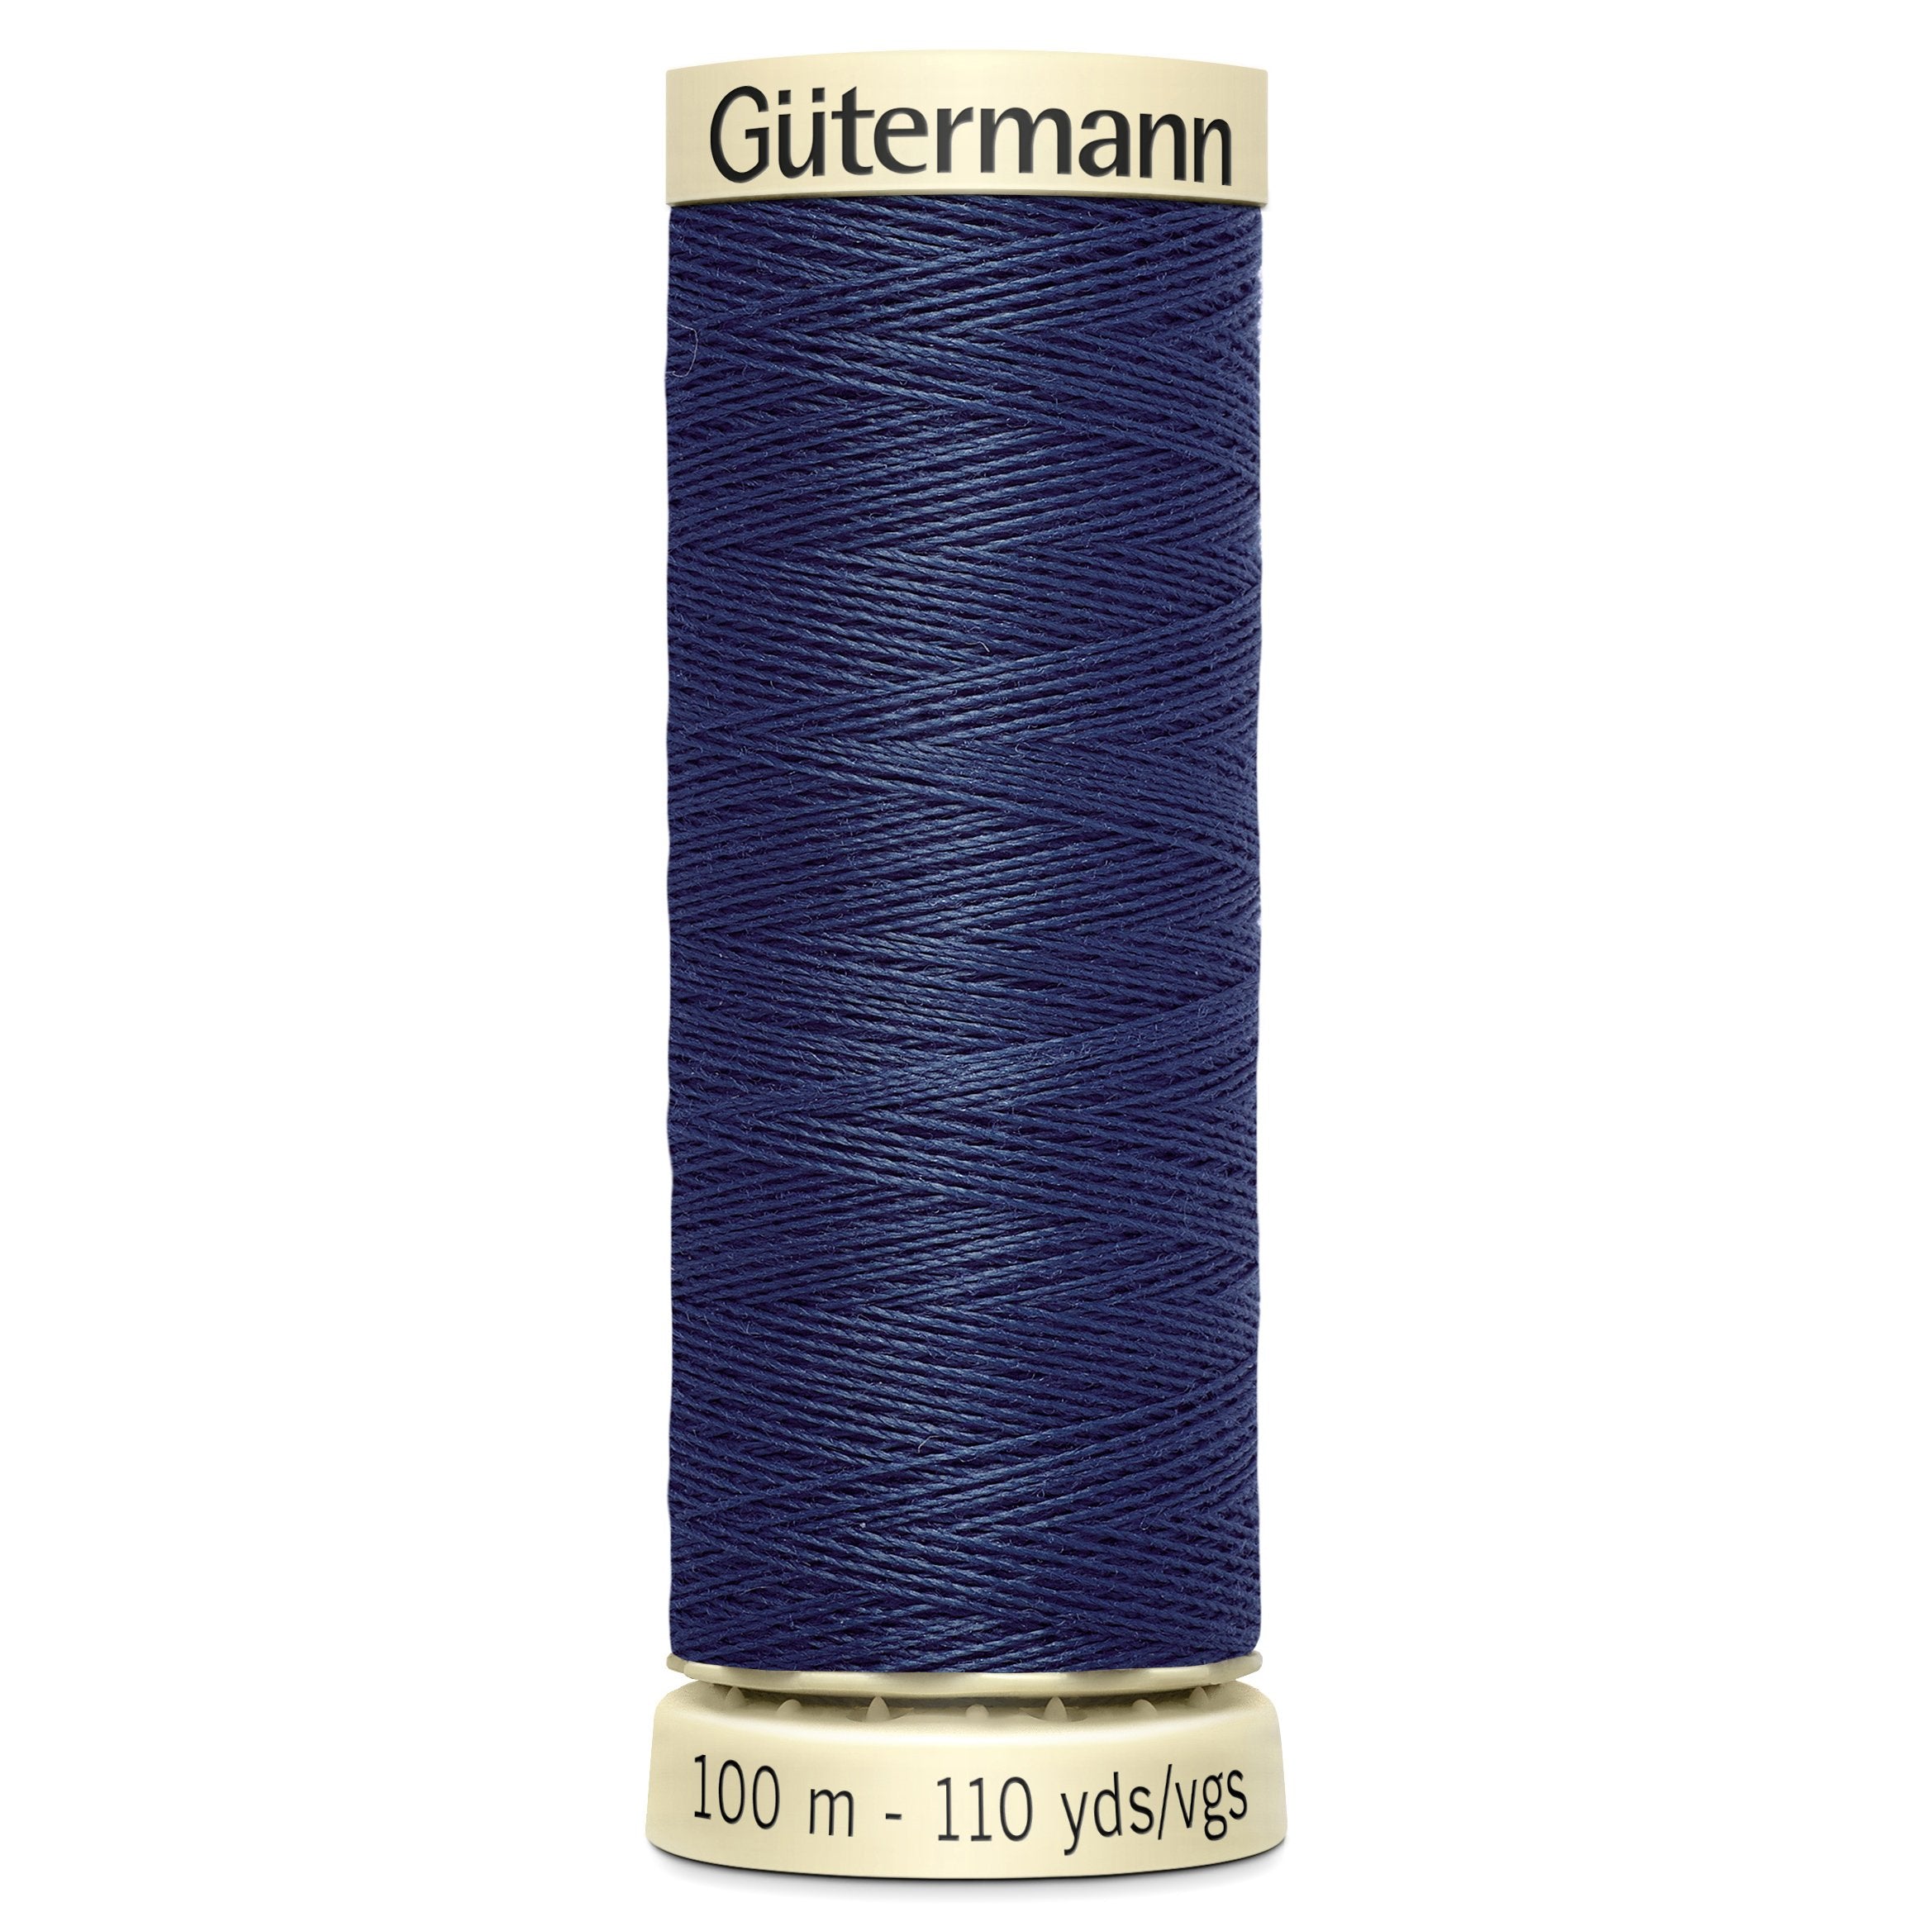 Gutermann Sew All Thread colour 537 Dark Petrol from Jaycotts Sewing Supplies